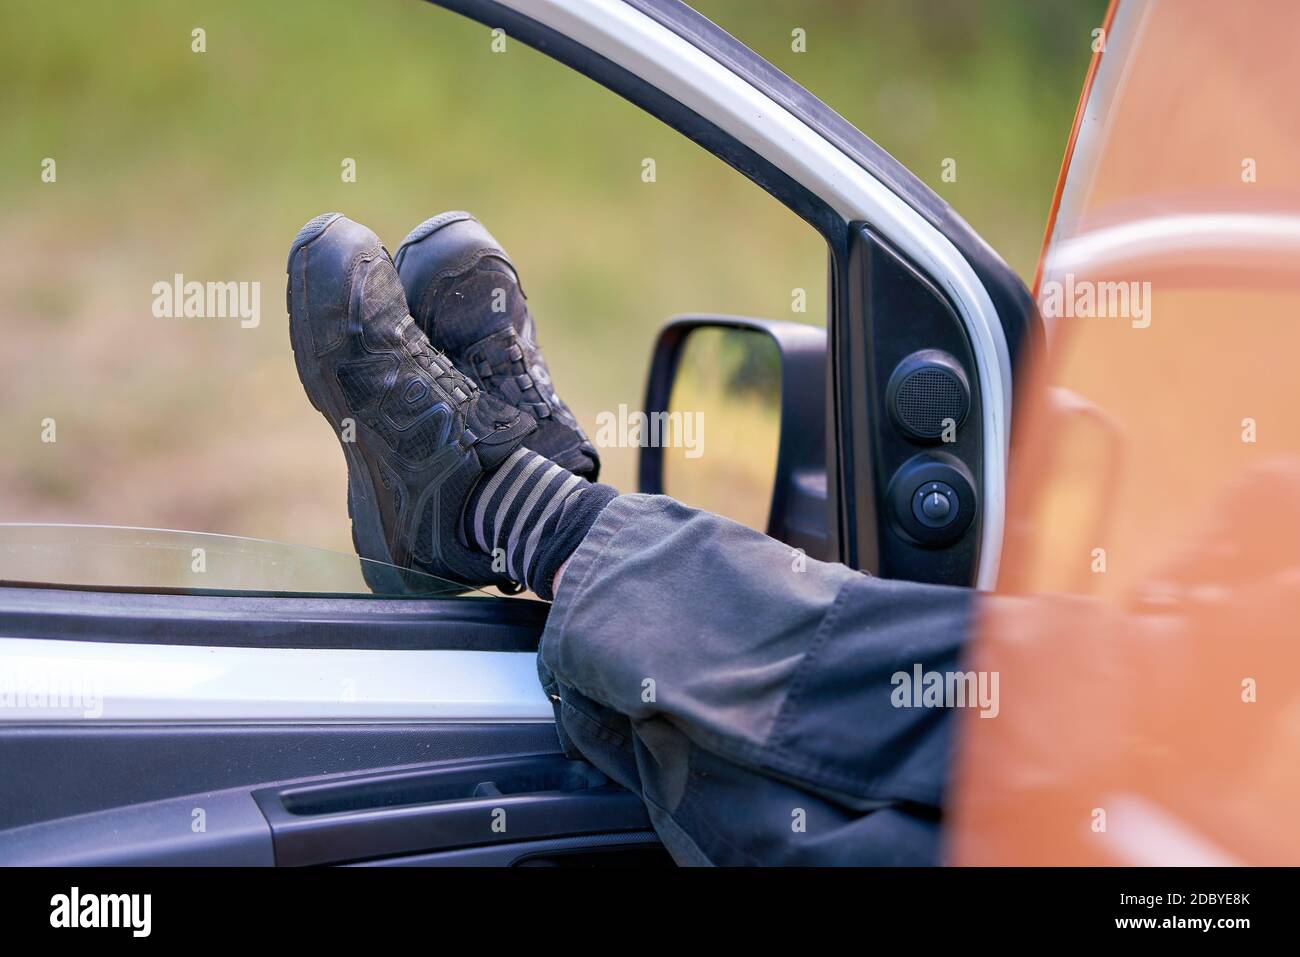 A worker in work clothes takes a break in his car Stock Photo